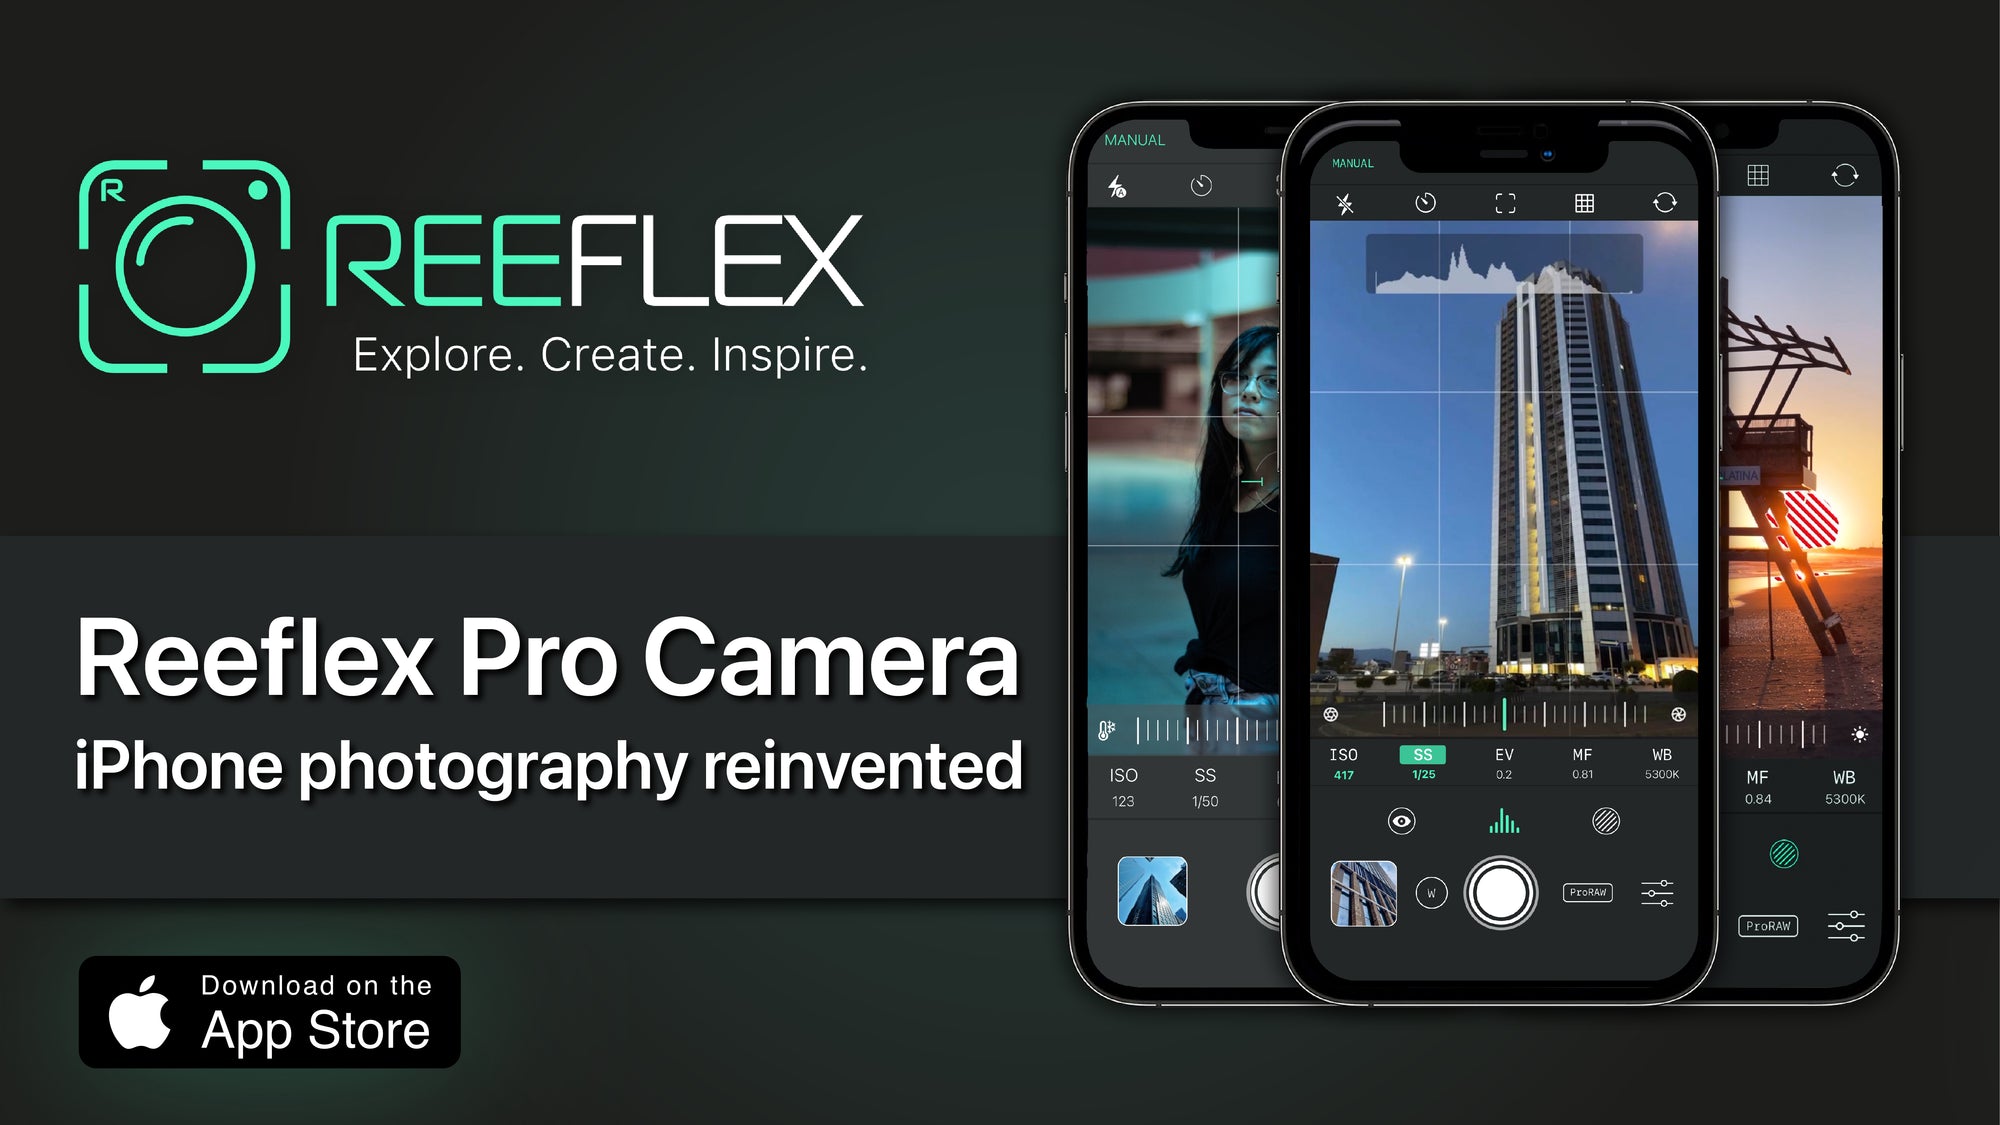 Reeflex team meets David Addison to talk about Pro Camera app and #ReeflexContest